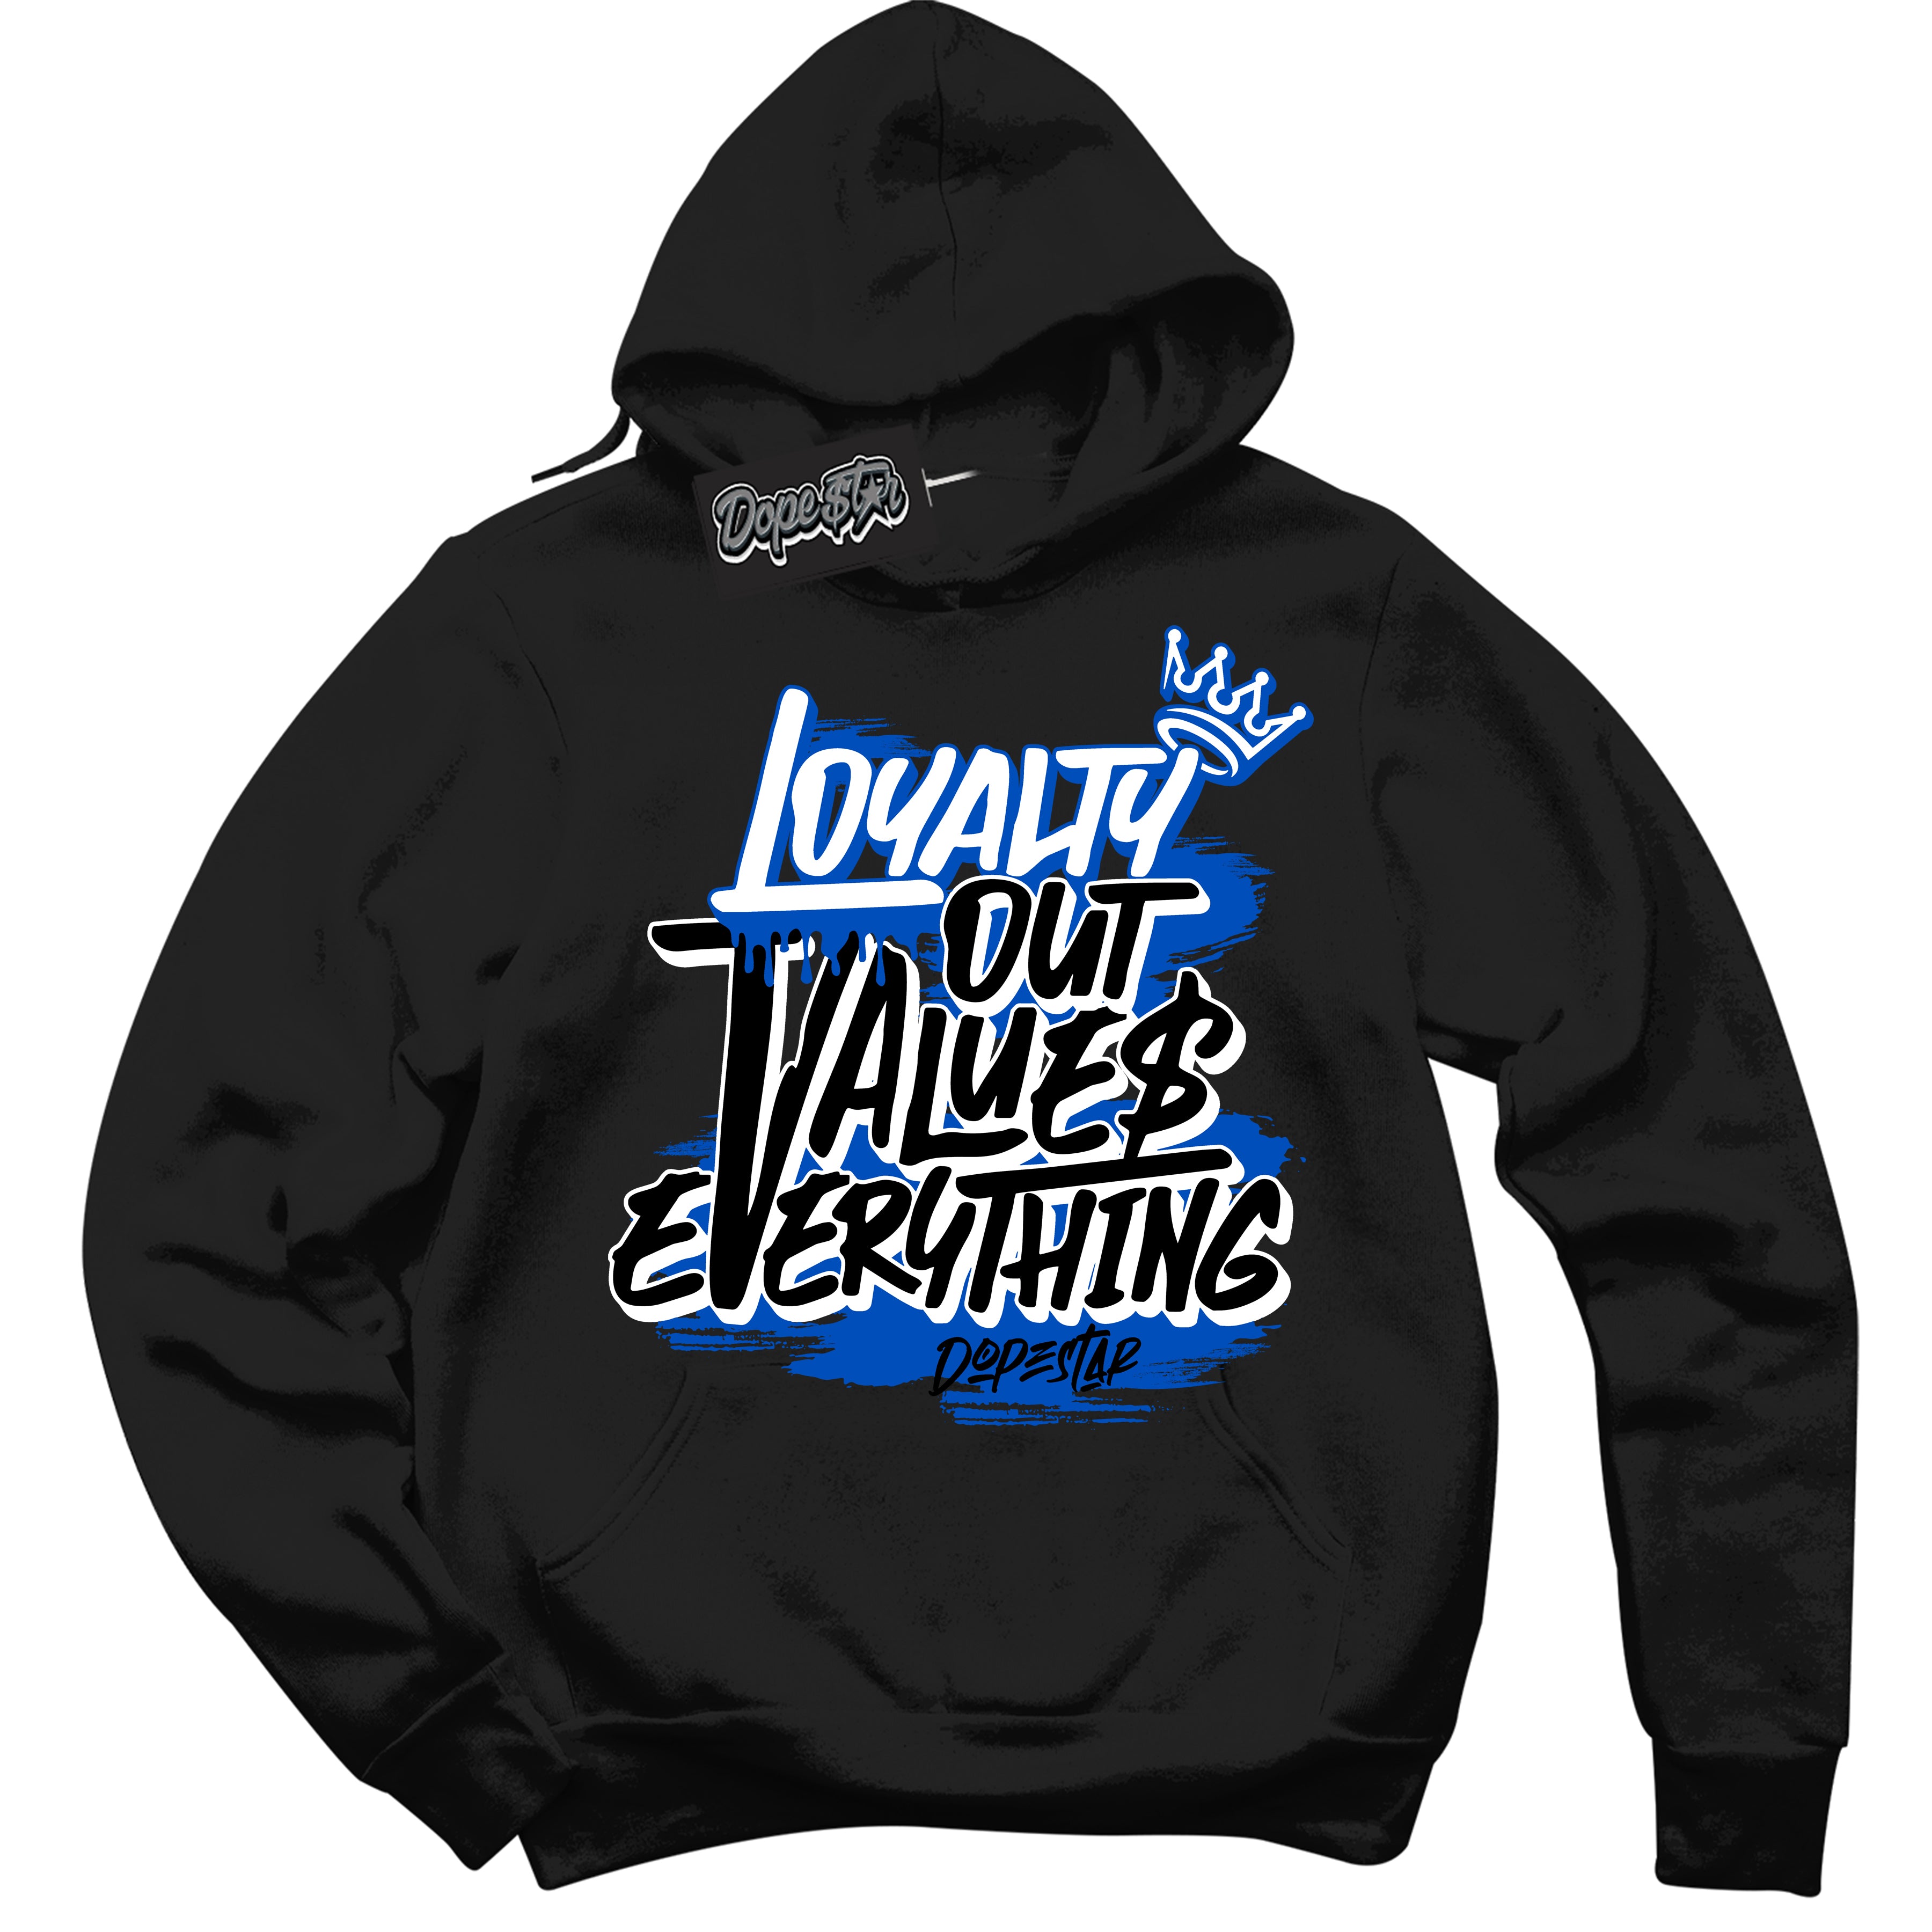 Cool Black Hoodie with “ Loyalty Out Values Everything ”  design that Perfectly Matches  Royal Reimagined 1s Sneakers.